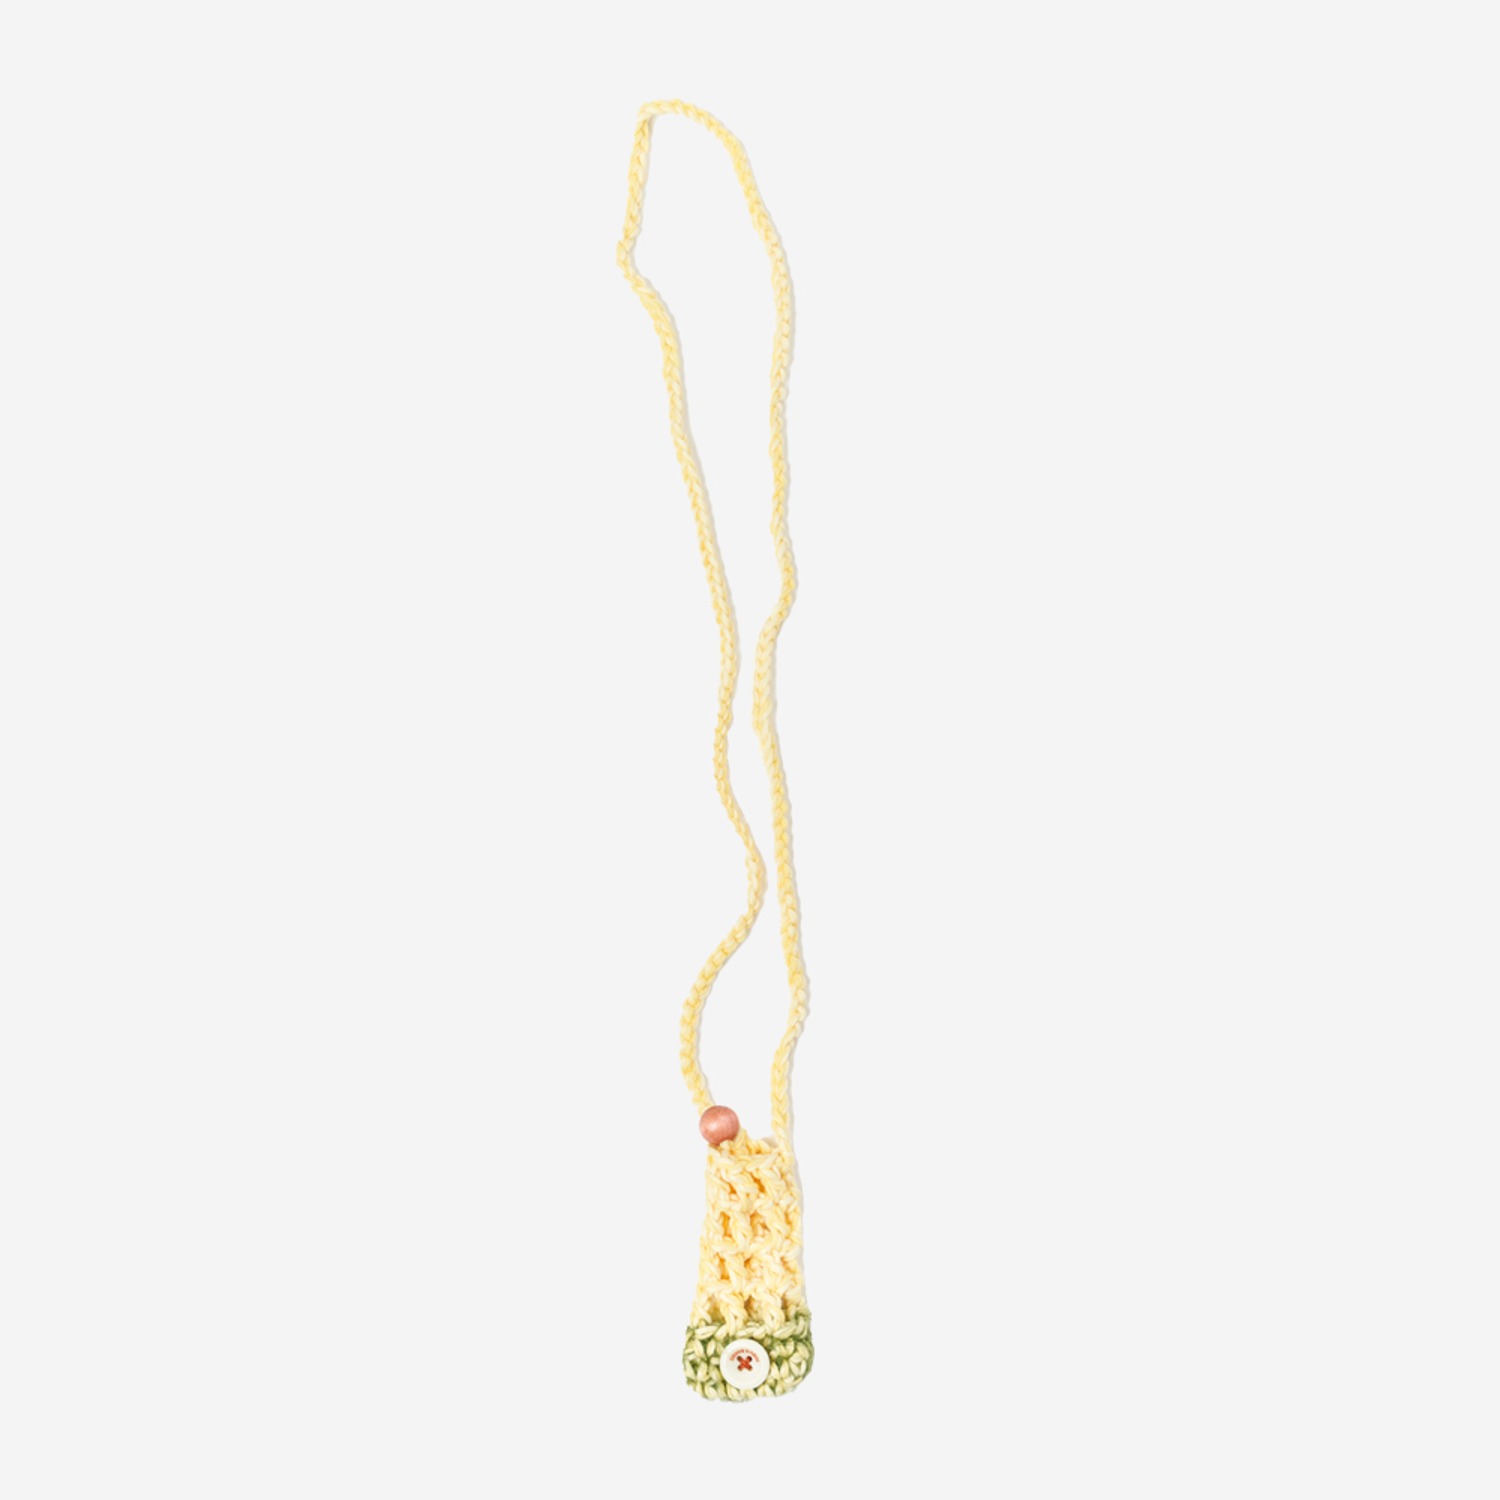 FIRE NECKLACE GLOW IN DARK YELLOW